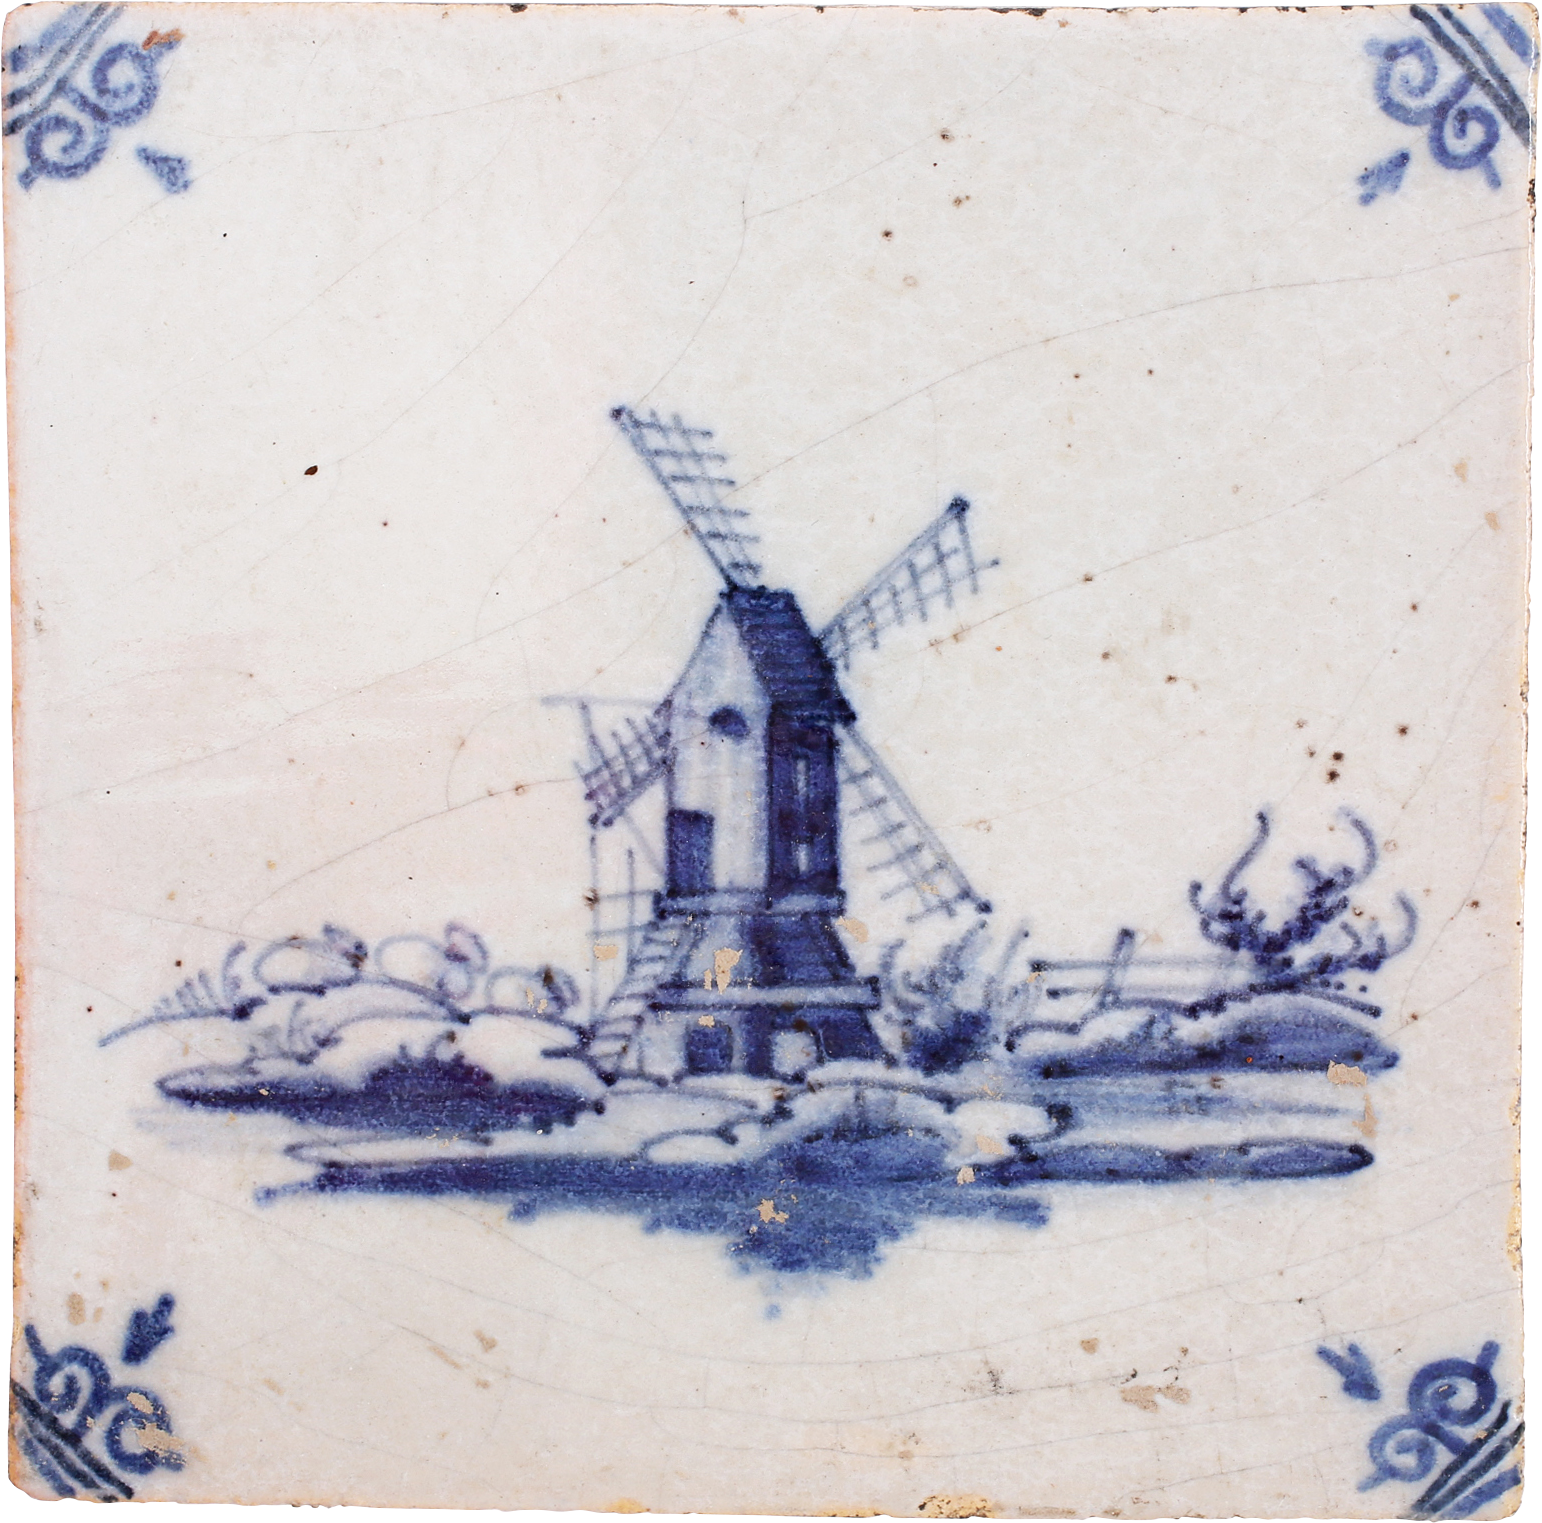 DELFT BLUE ON WHITE TILE, MID 17TH CENTURY. - Fagan Arms